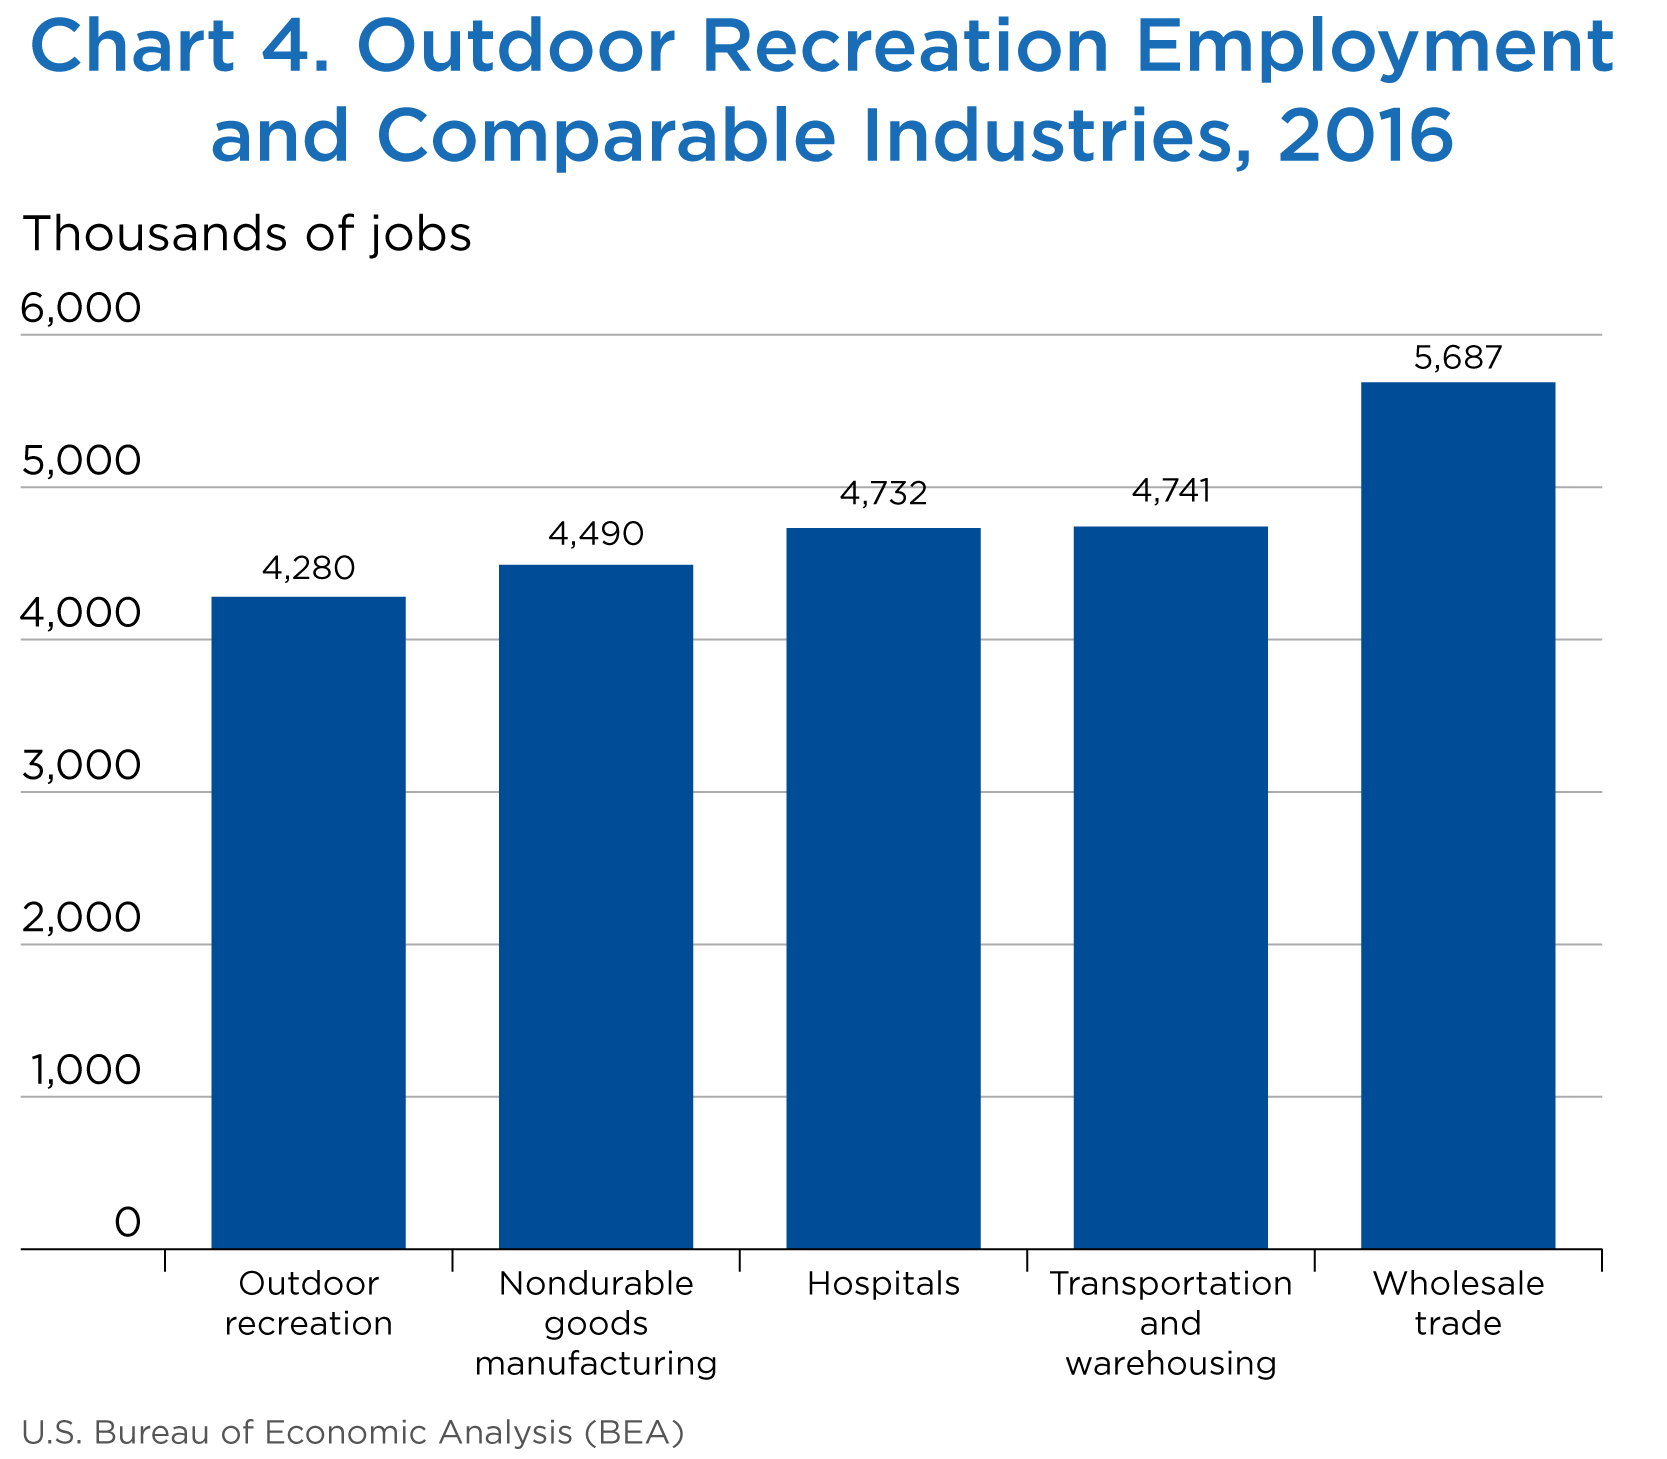 Chart 4. Outdoor Recreation Employment and Comparable Industries, 2016, Bar Chart